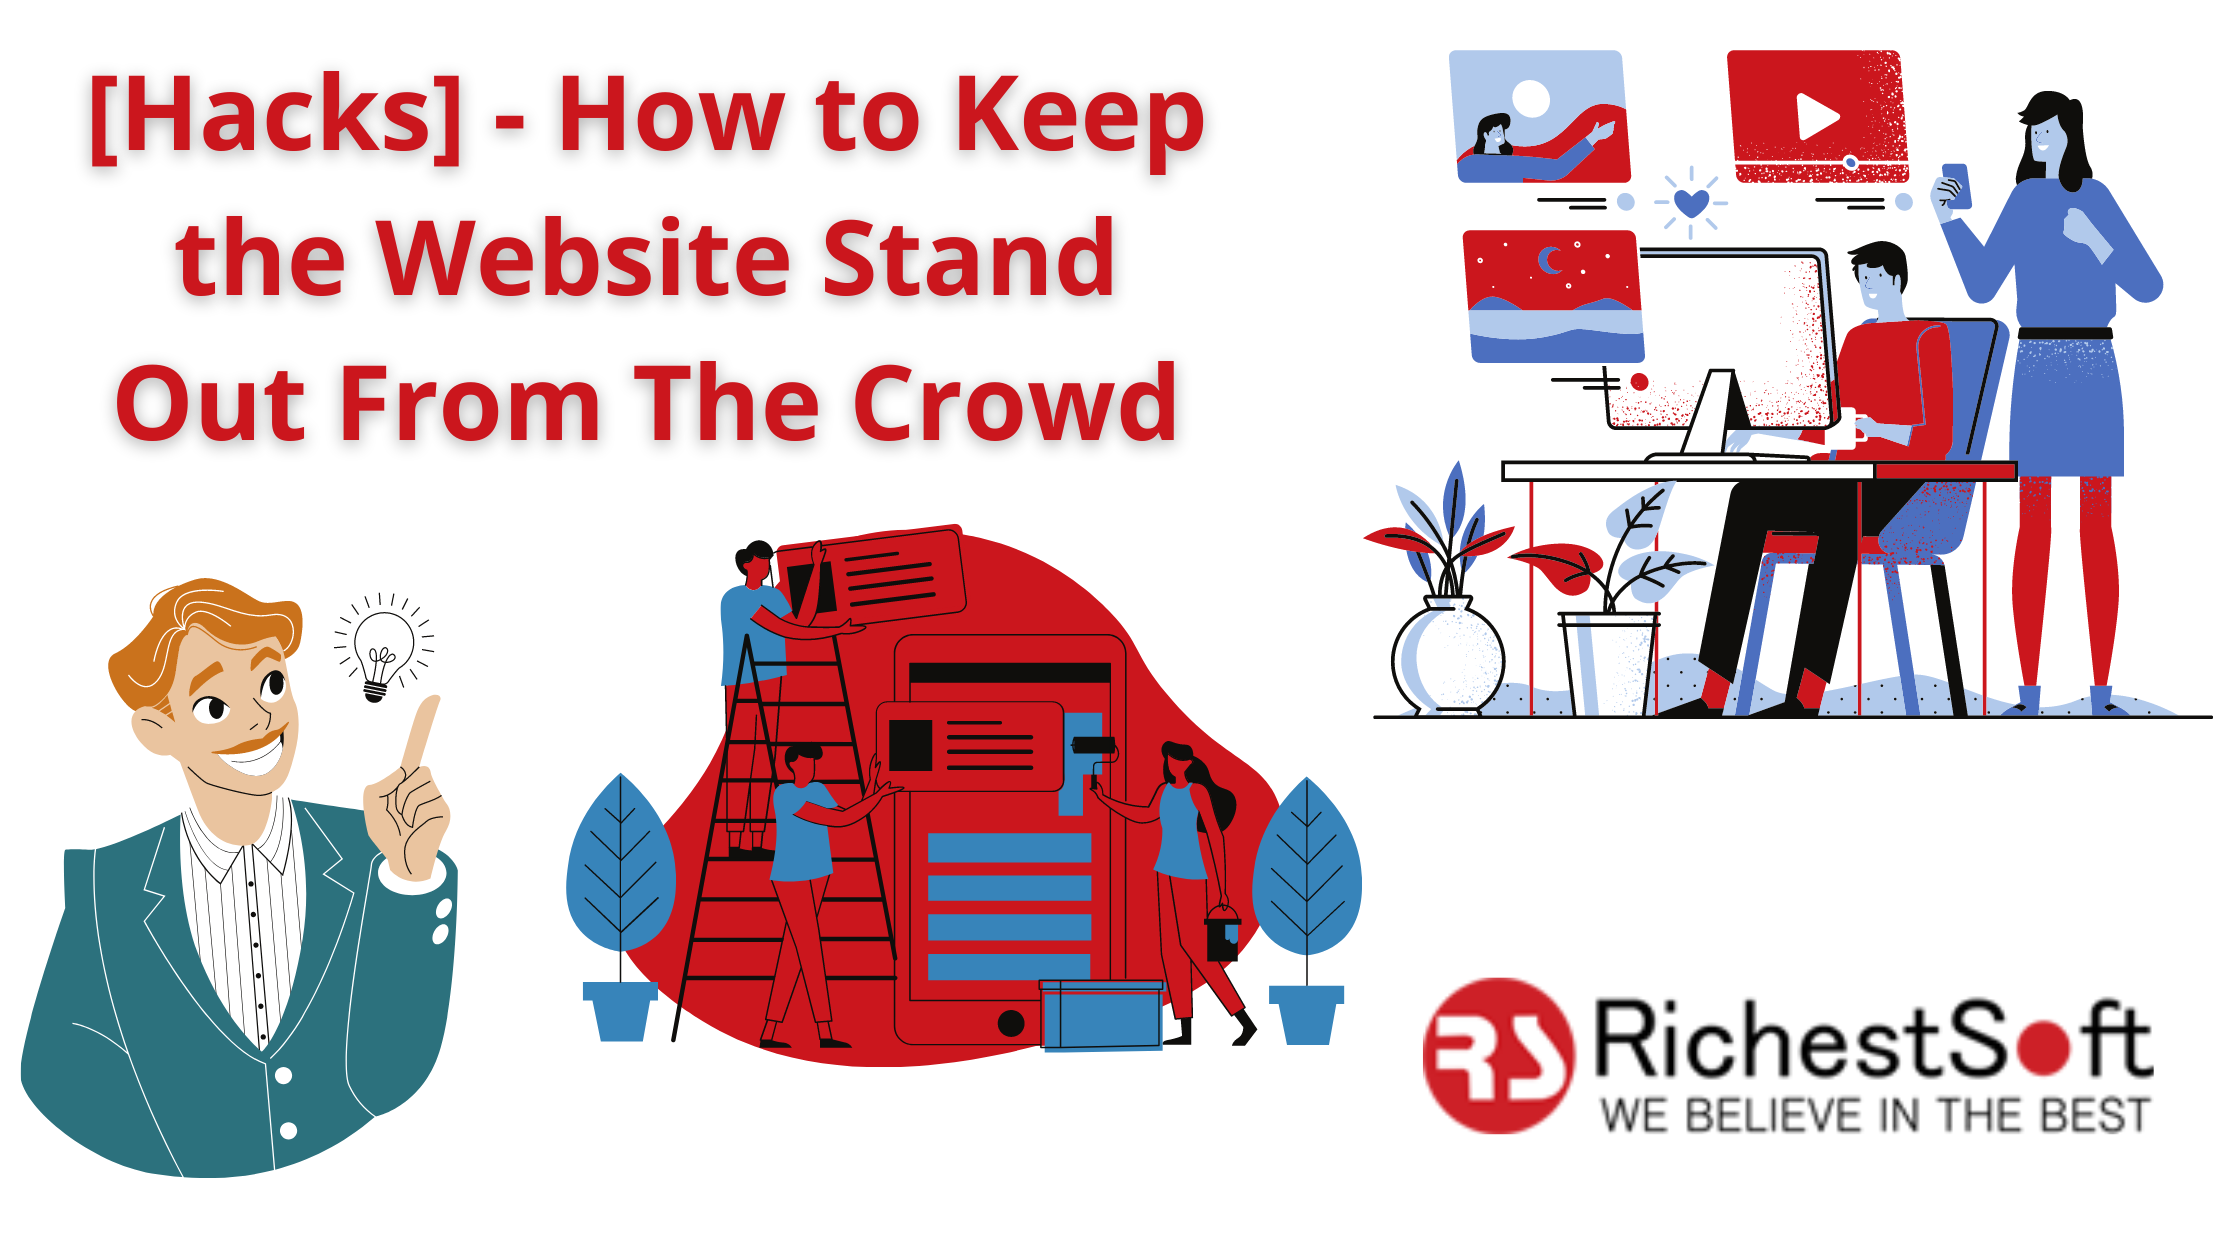 Hacks-How-to-Keep-the-Website-Stand-Out-From-The-Crowd.png